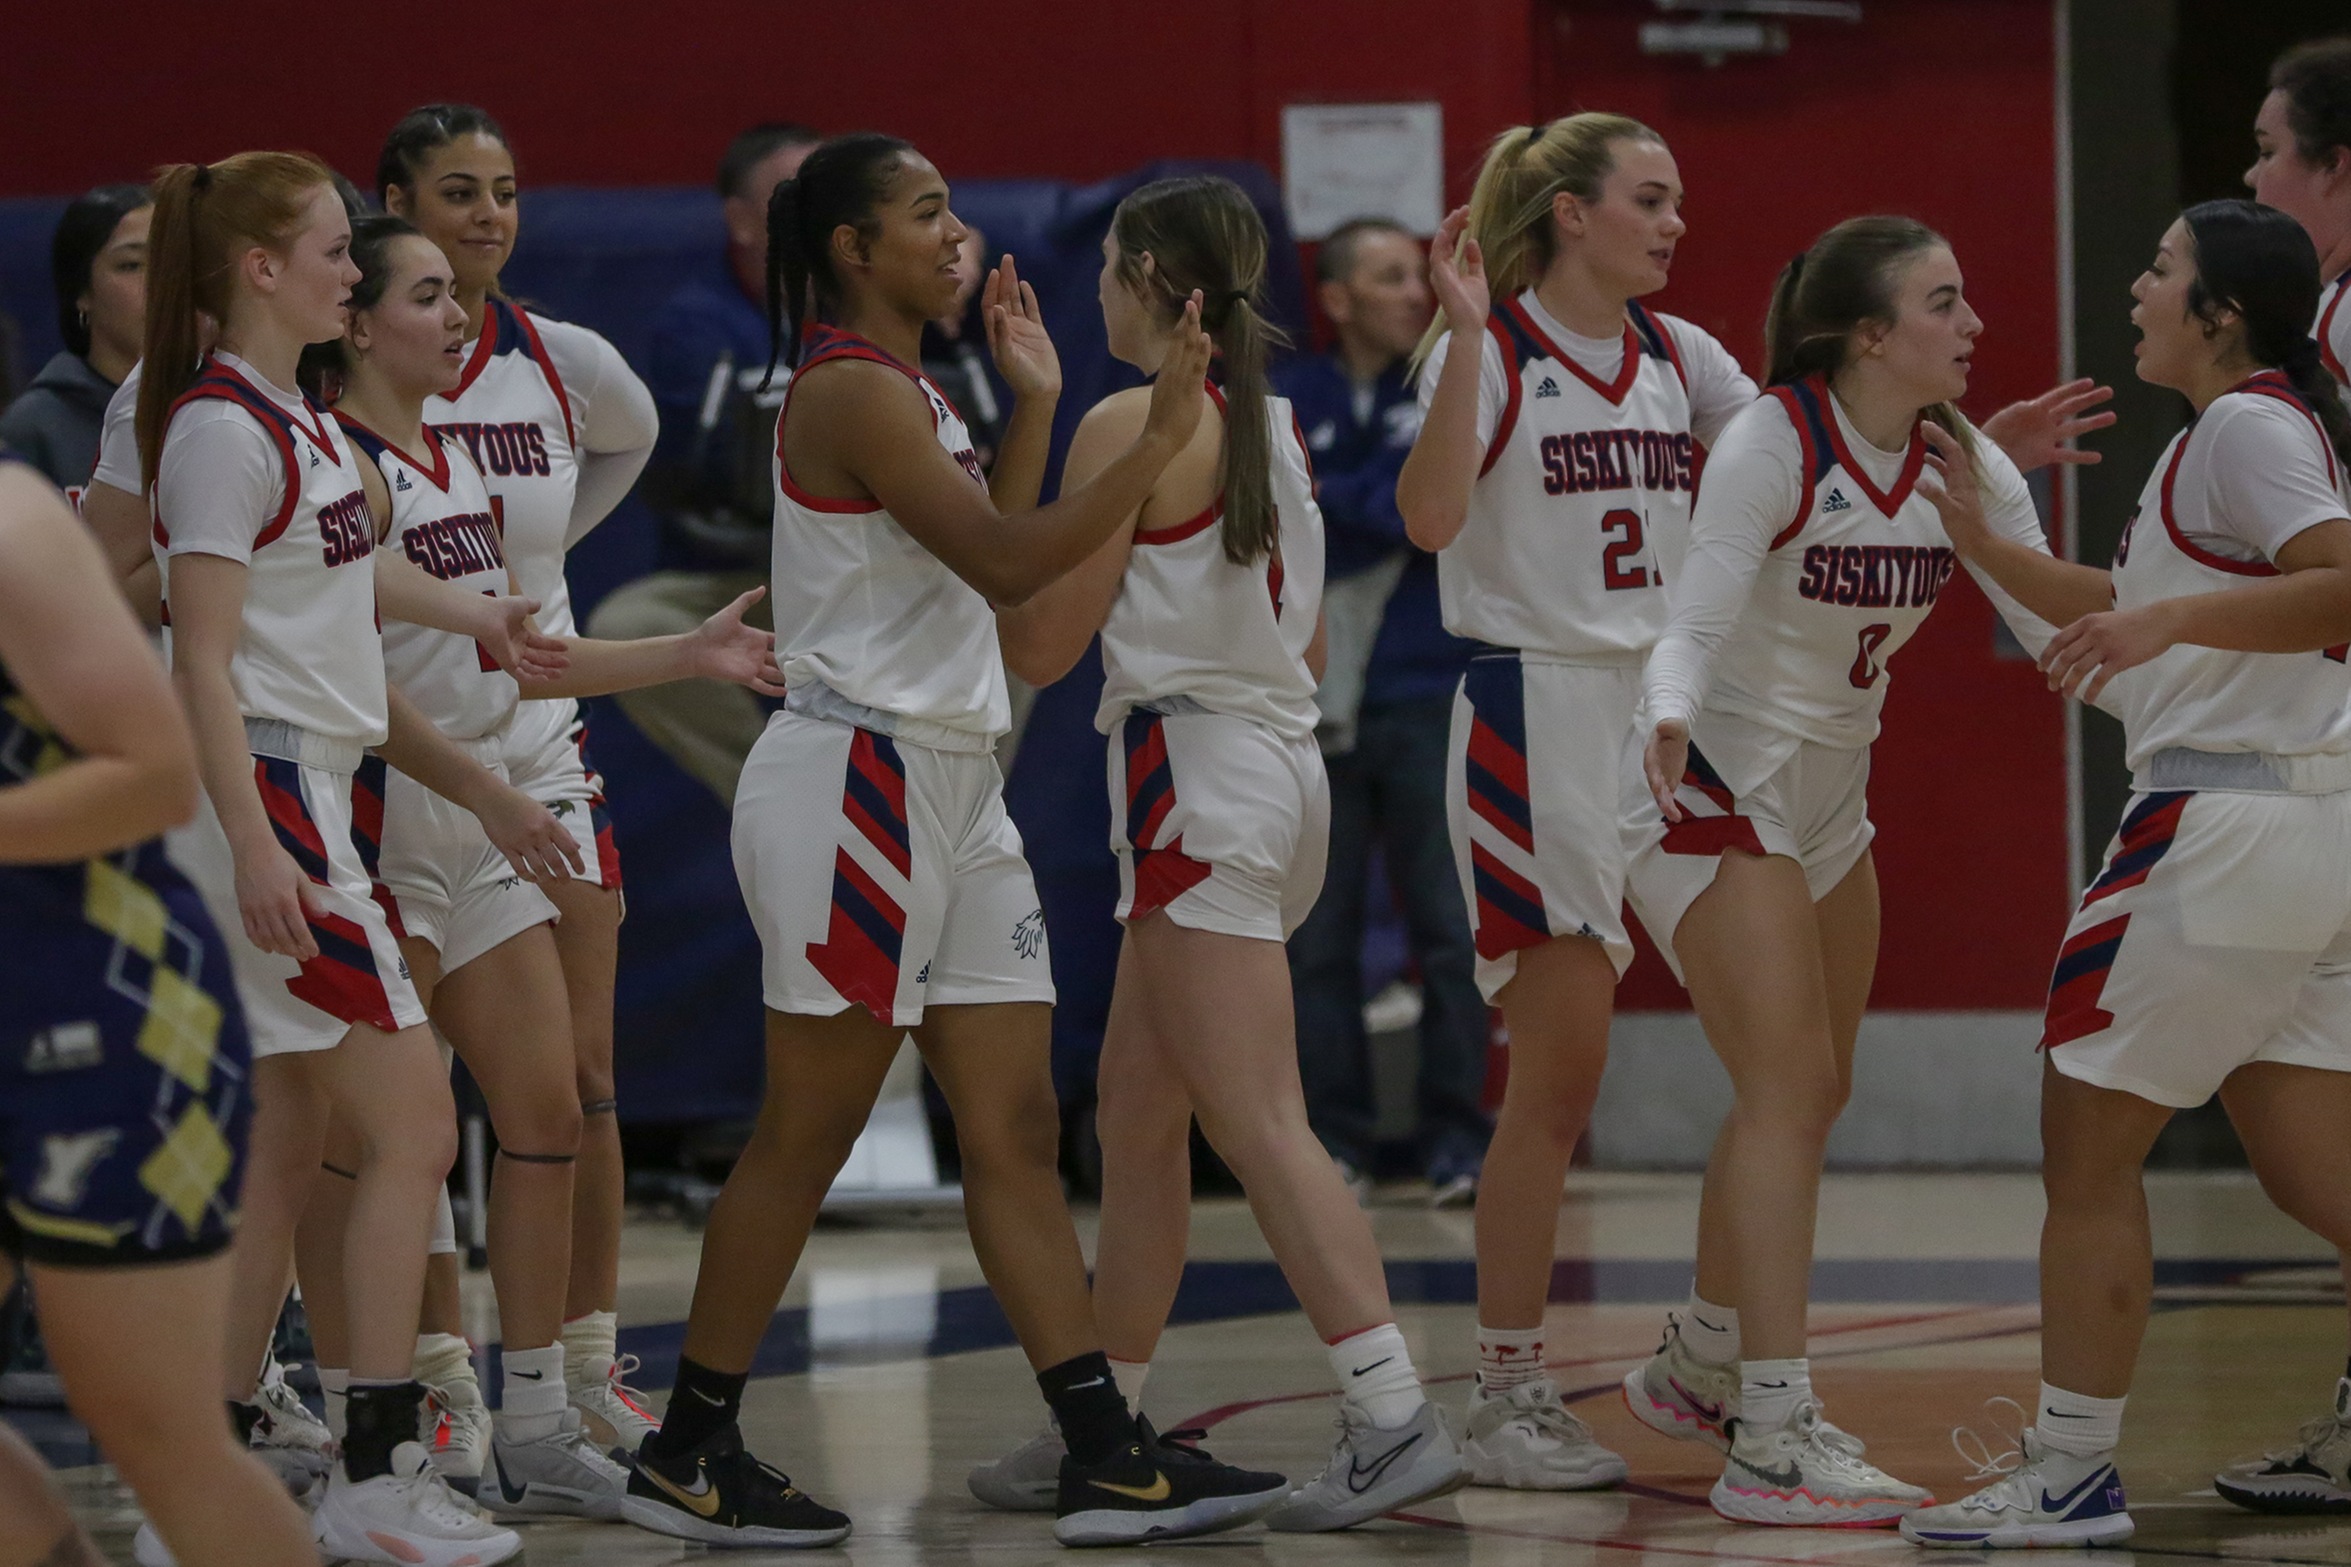 Eagle women are 9-3 after exciting come-from-behind win at home